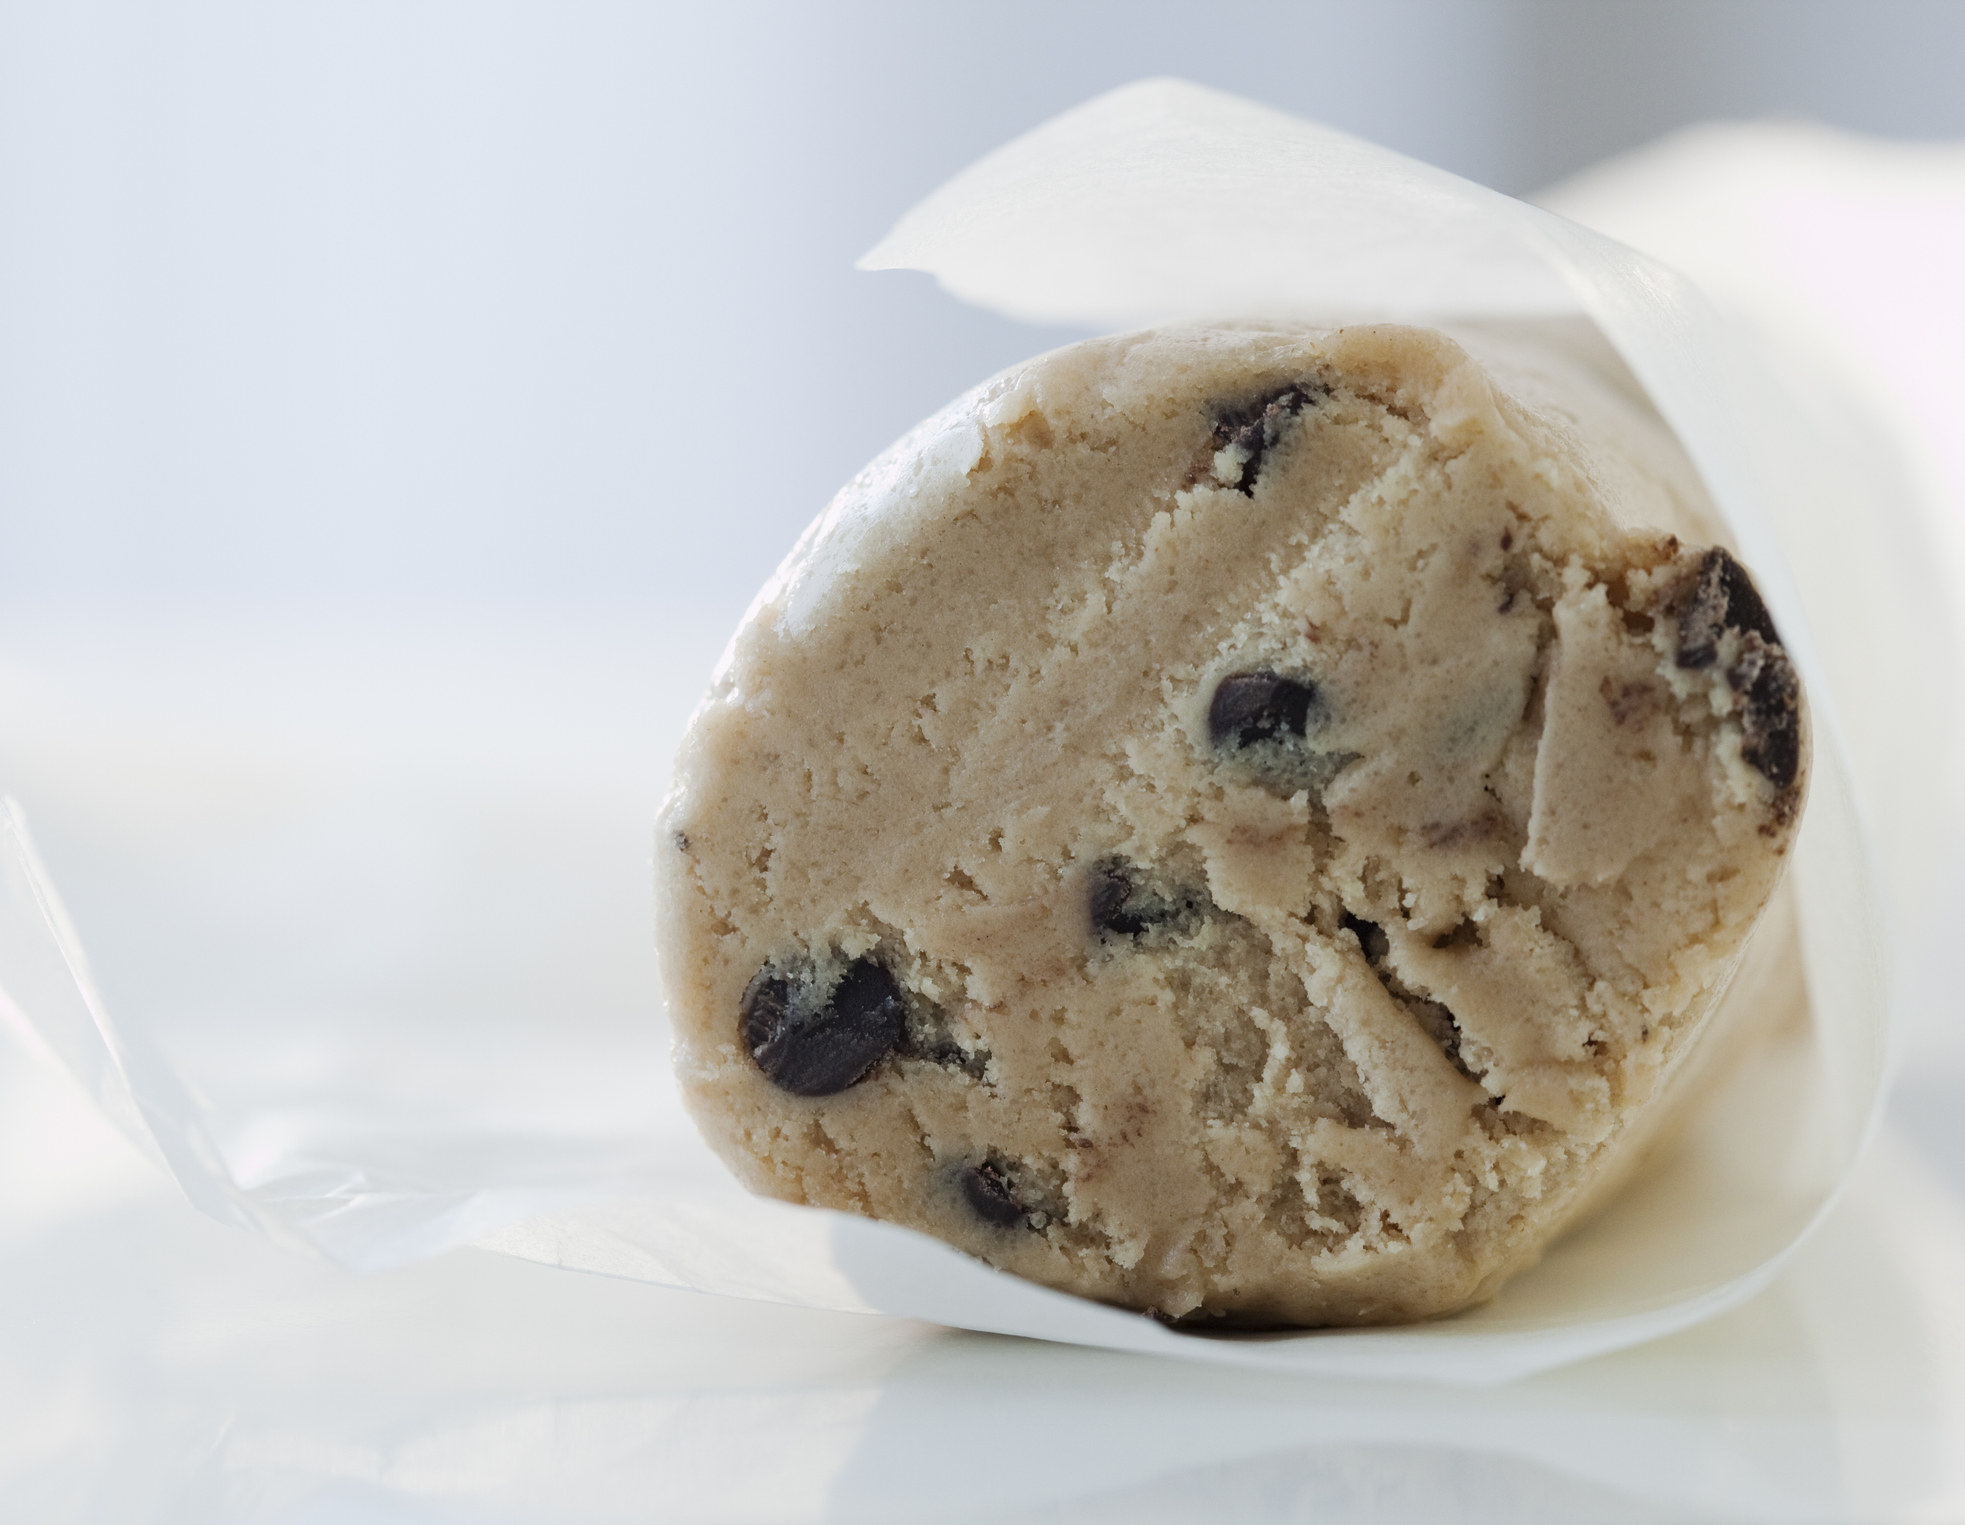 A roll of chocolate chip cookie dough in wax paper.